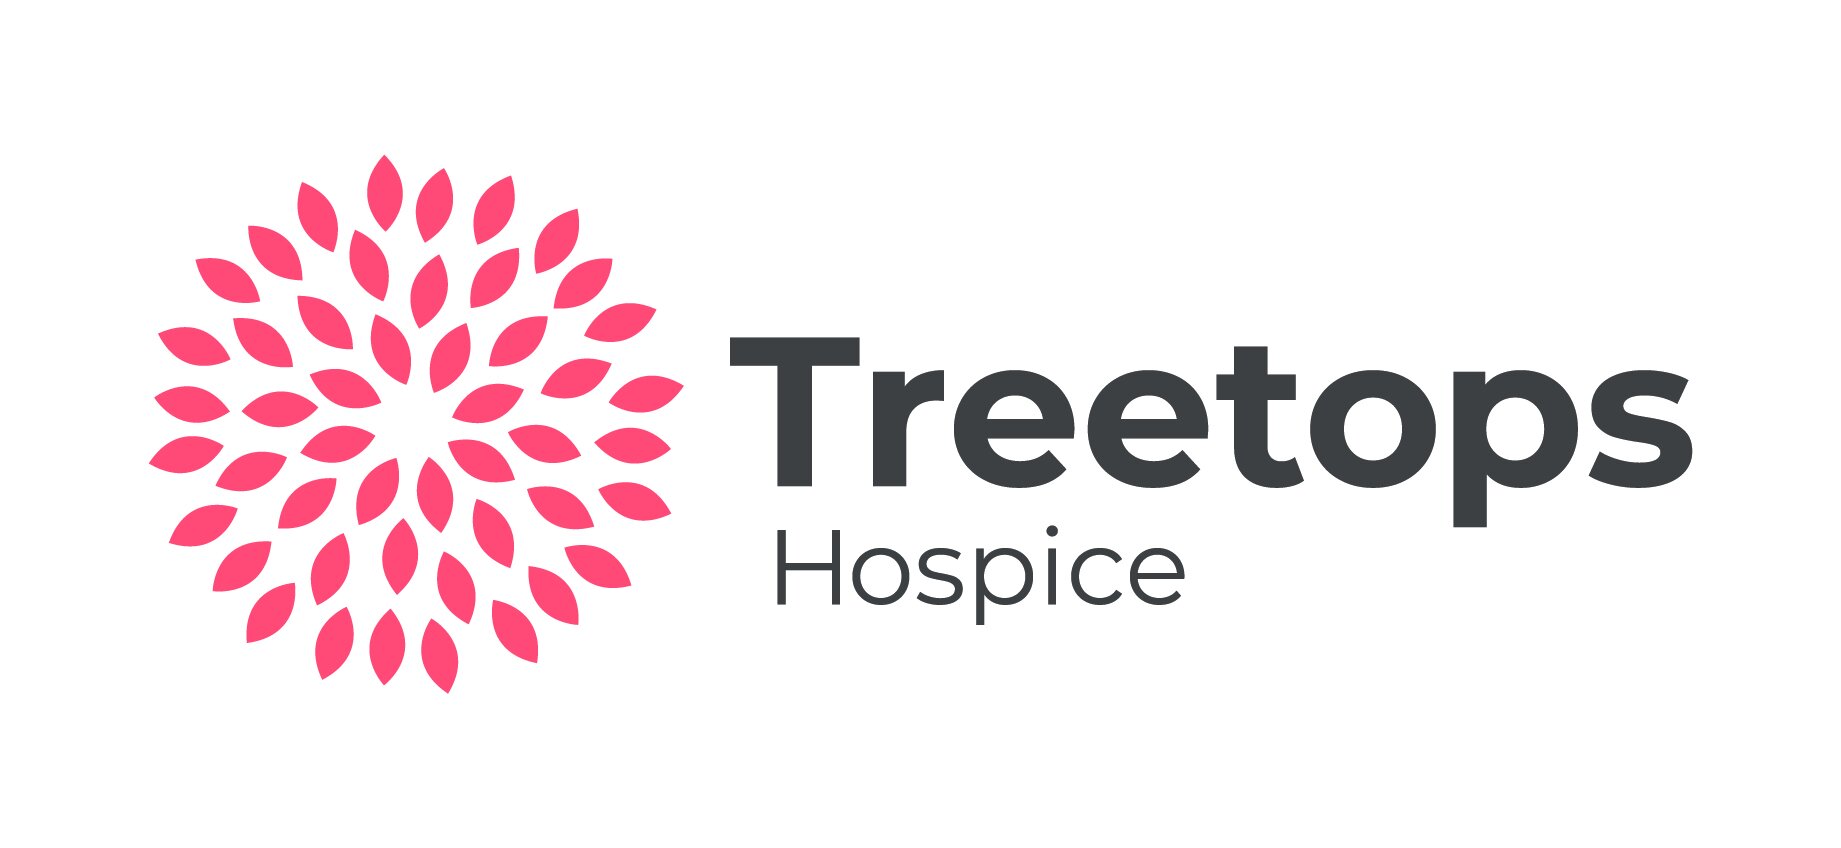 Firms help hospice roll out new branding